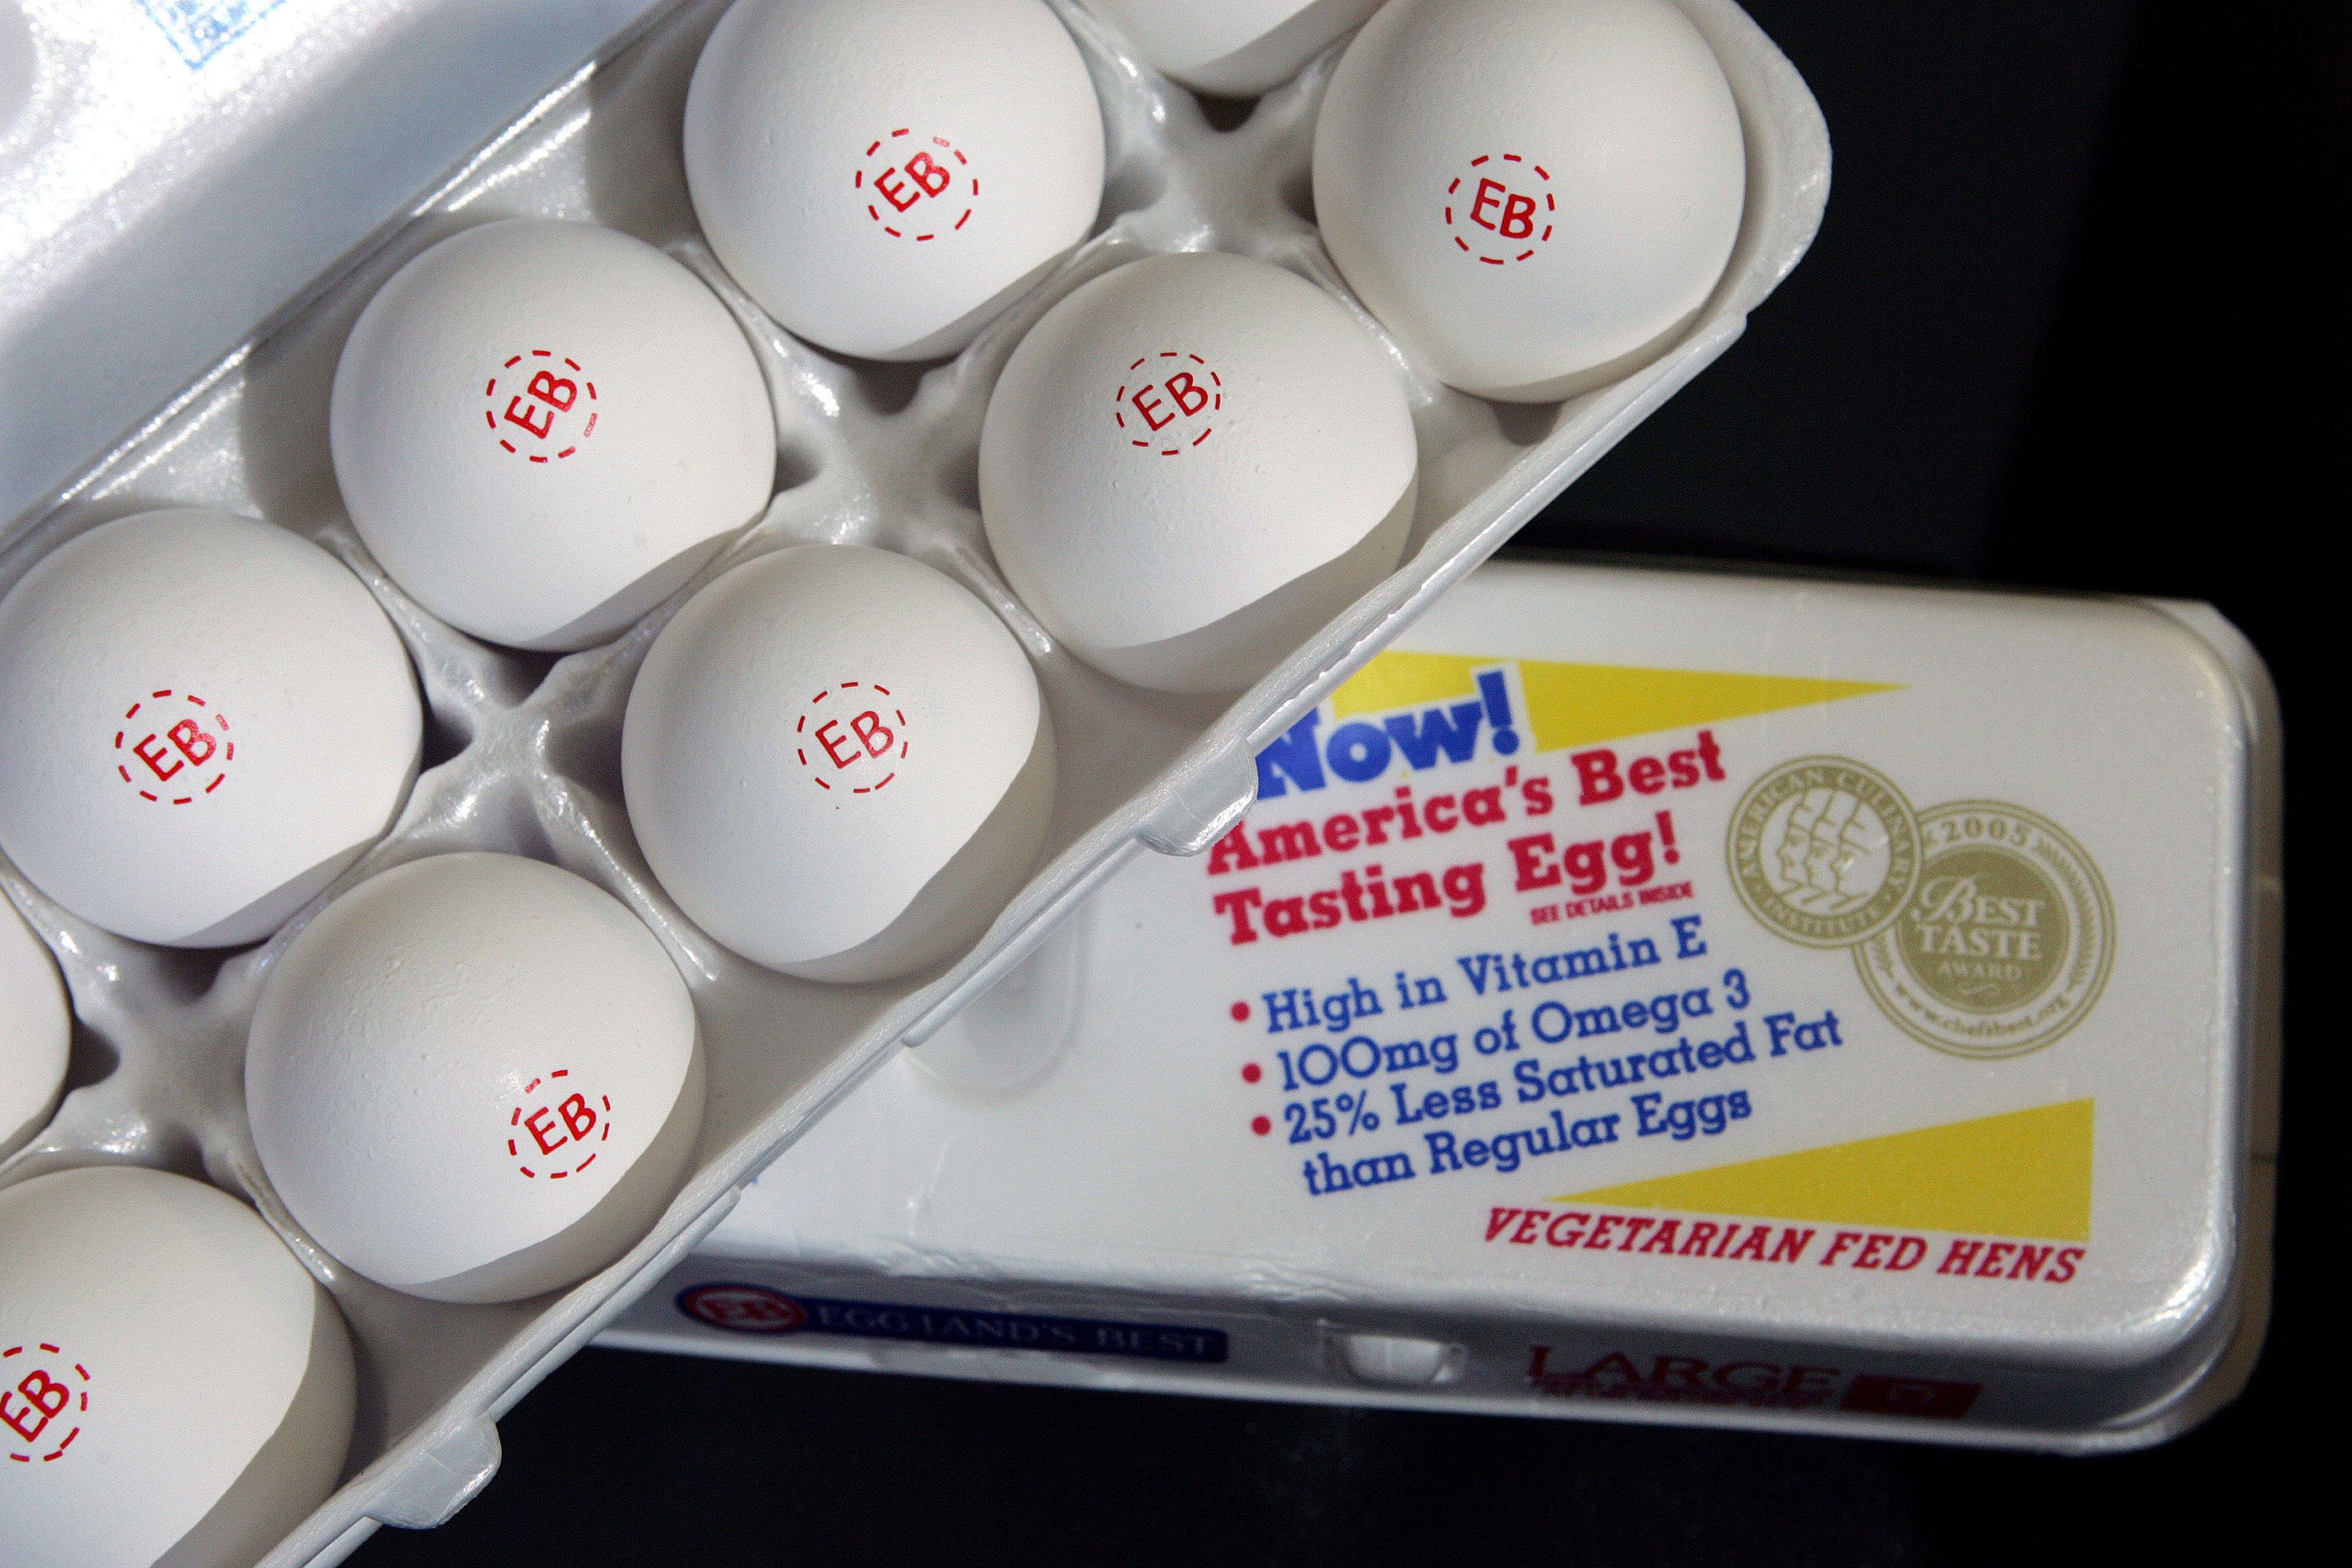 Cal-Maine Extra Large Eggs, 180 ct